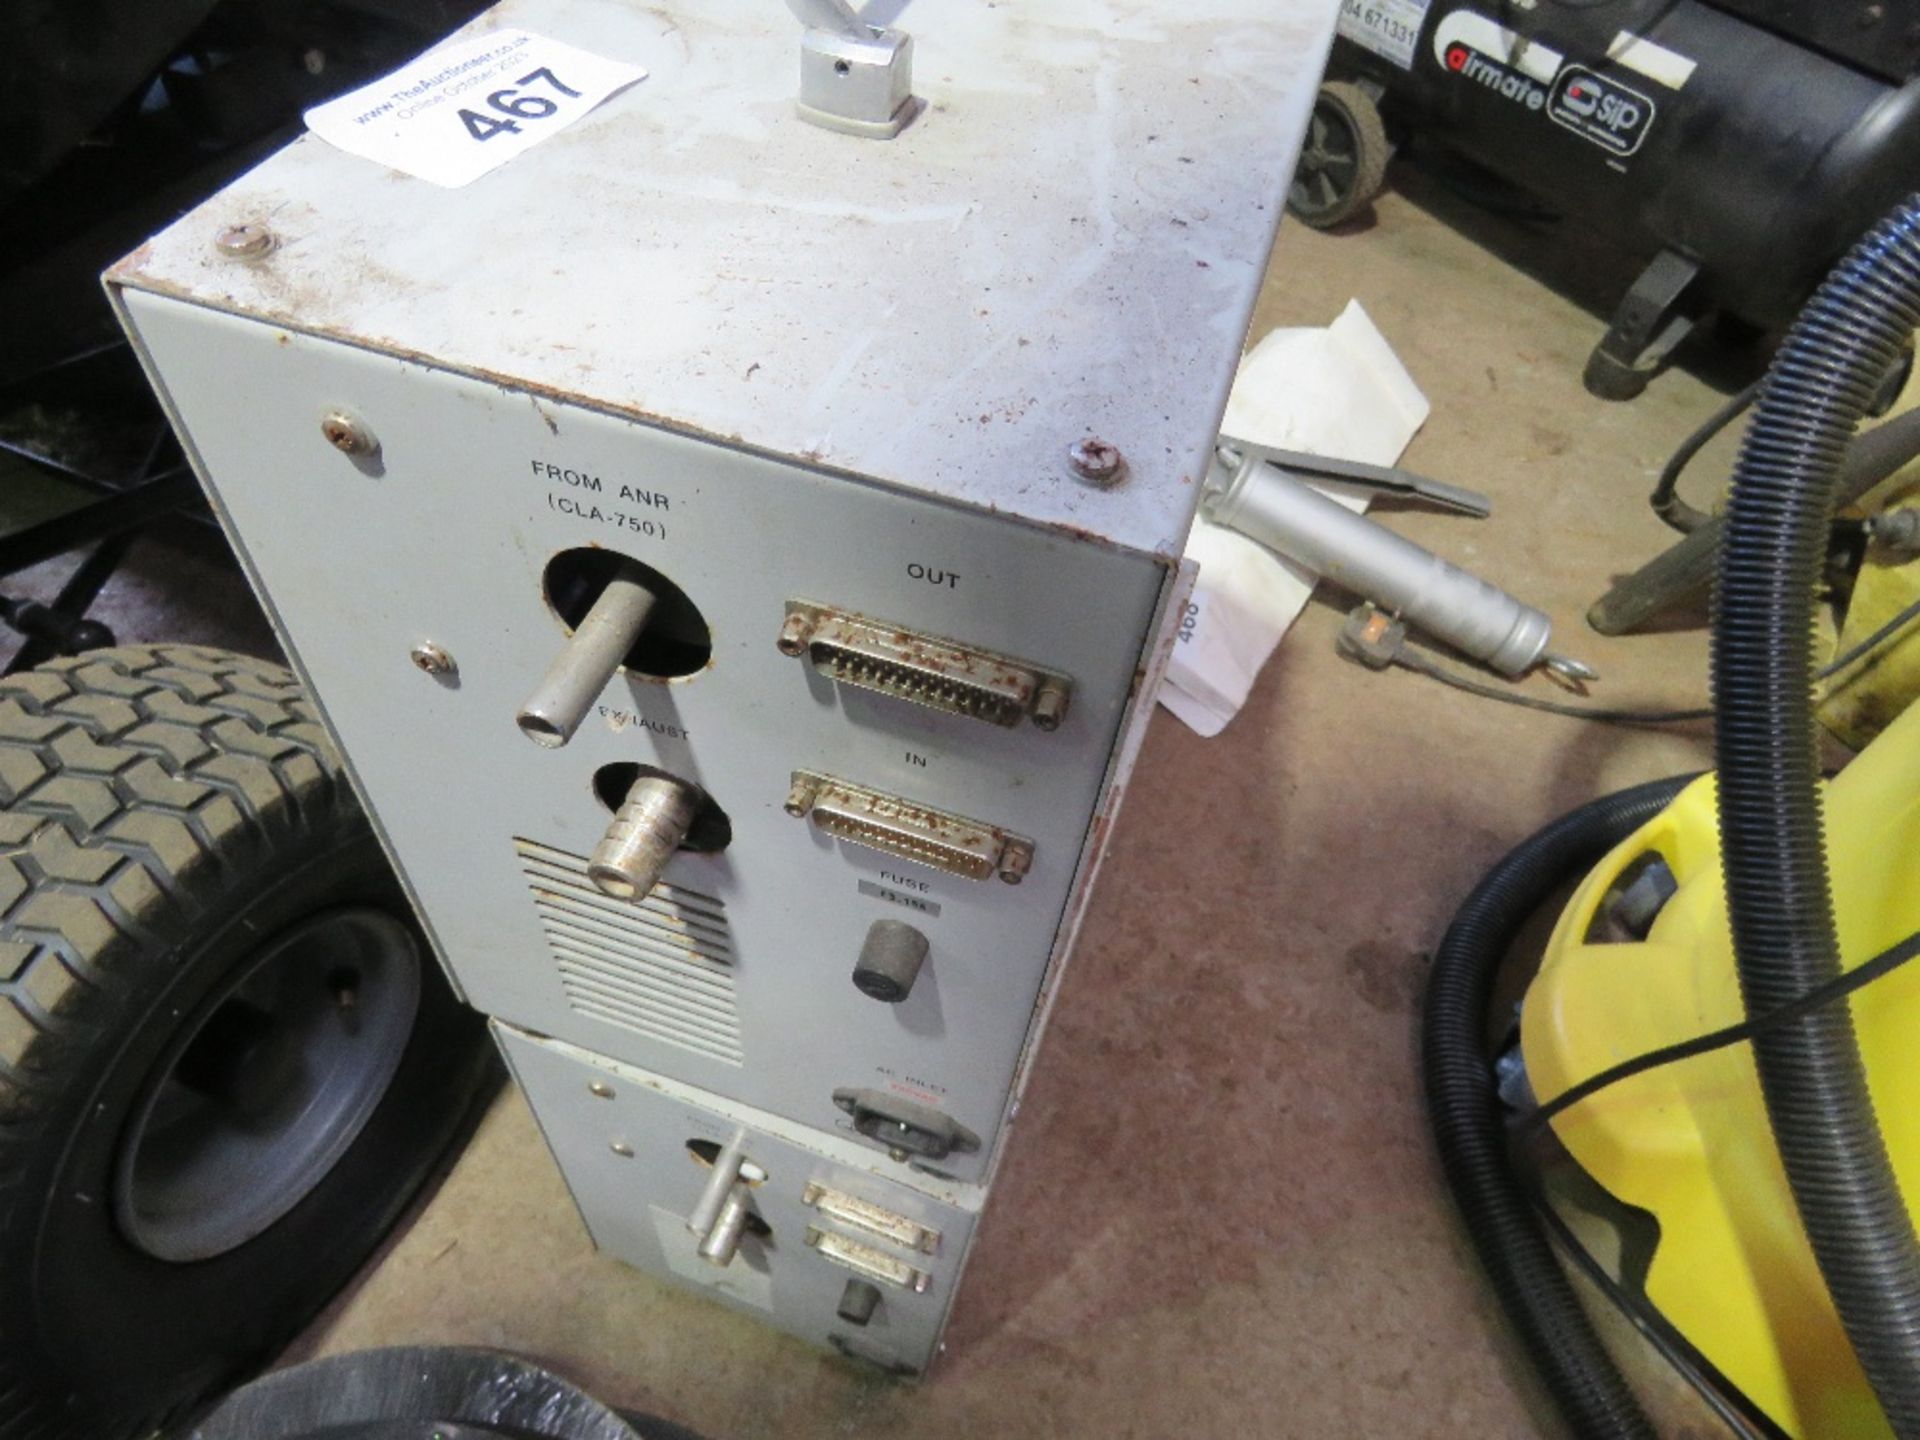 2 X HURISH VACUUM PUMP UNIT SOURCED FROM SITE CLOSURE/CLEARANCE. - Image 4 of 4